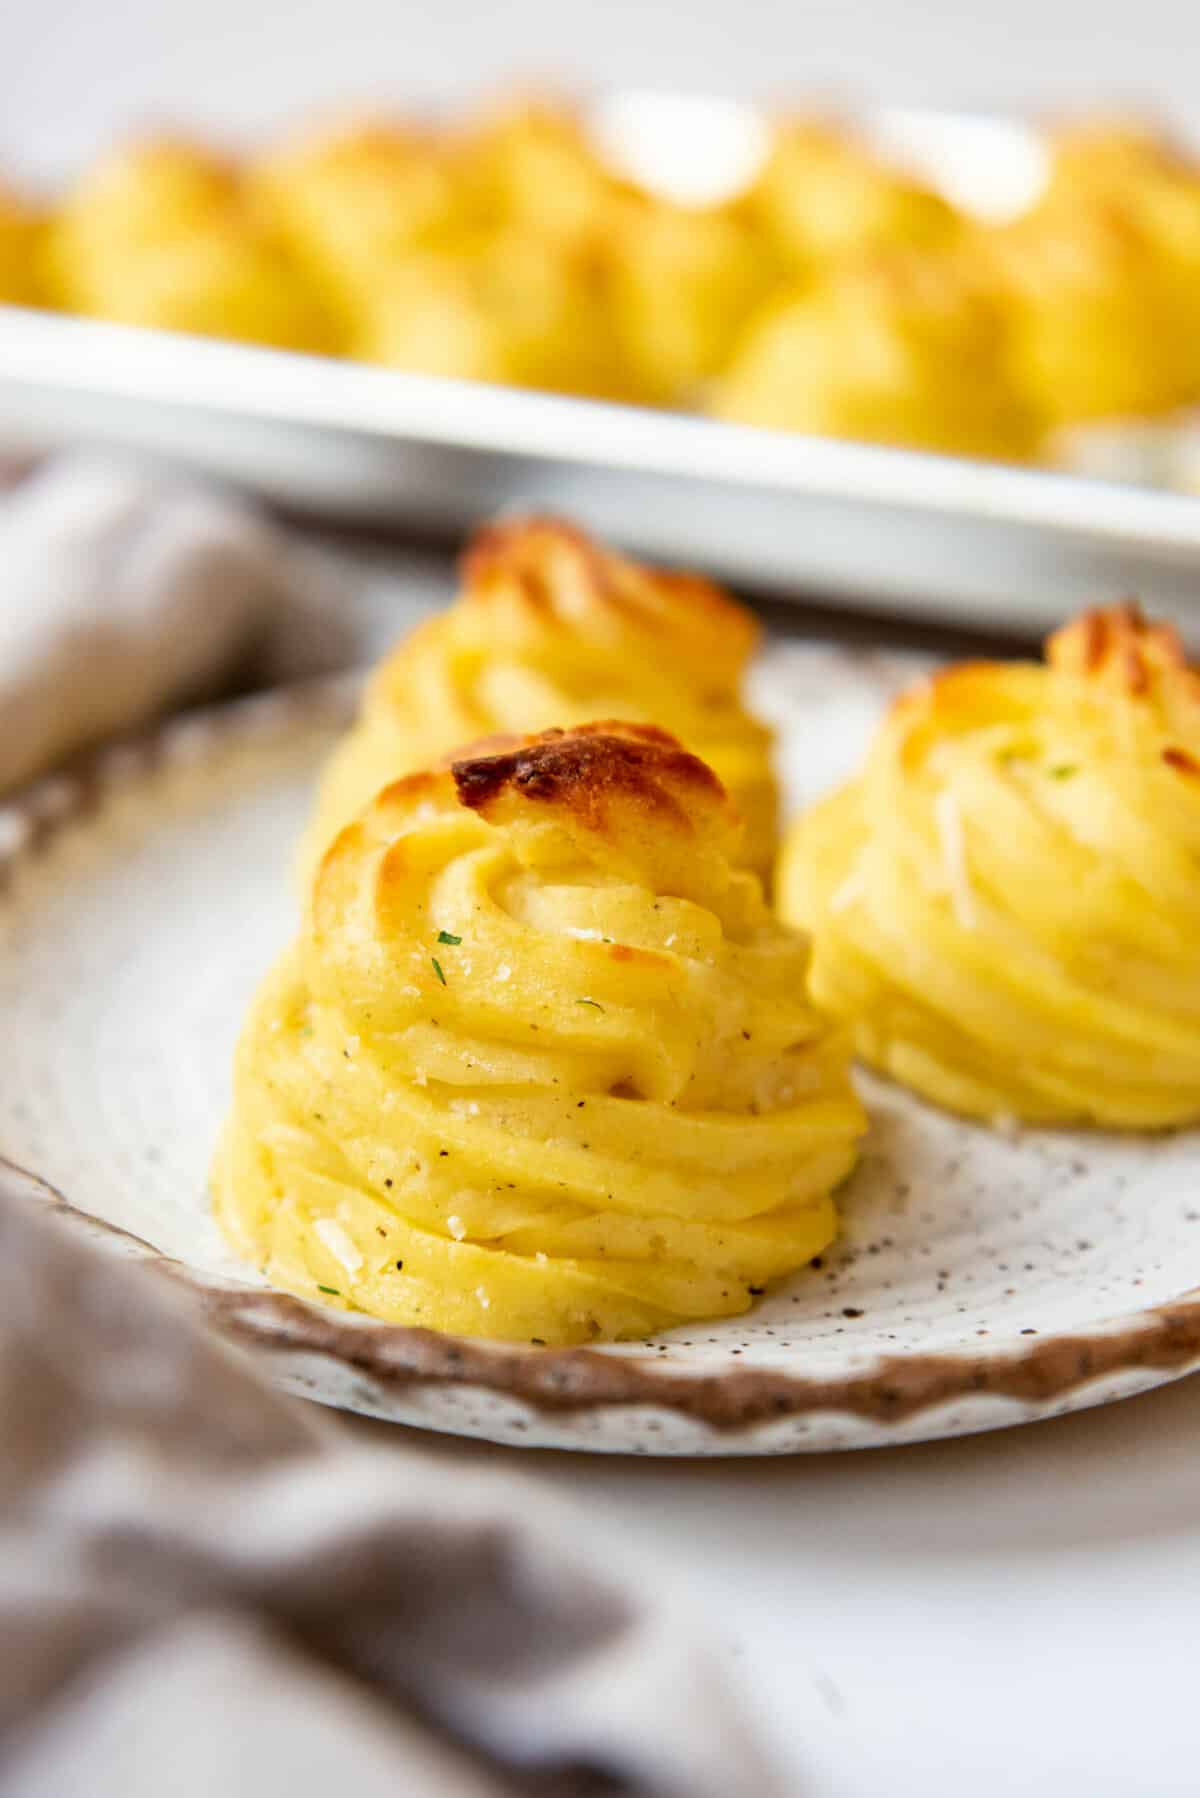 Creamy duchess potatoes on a plate in front of more potatoes on a baking sheet.